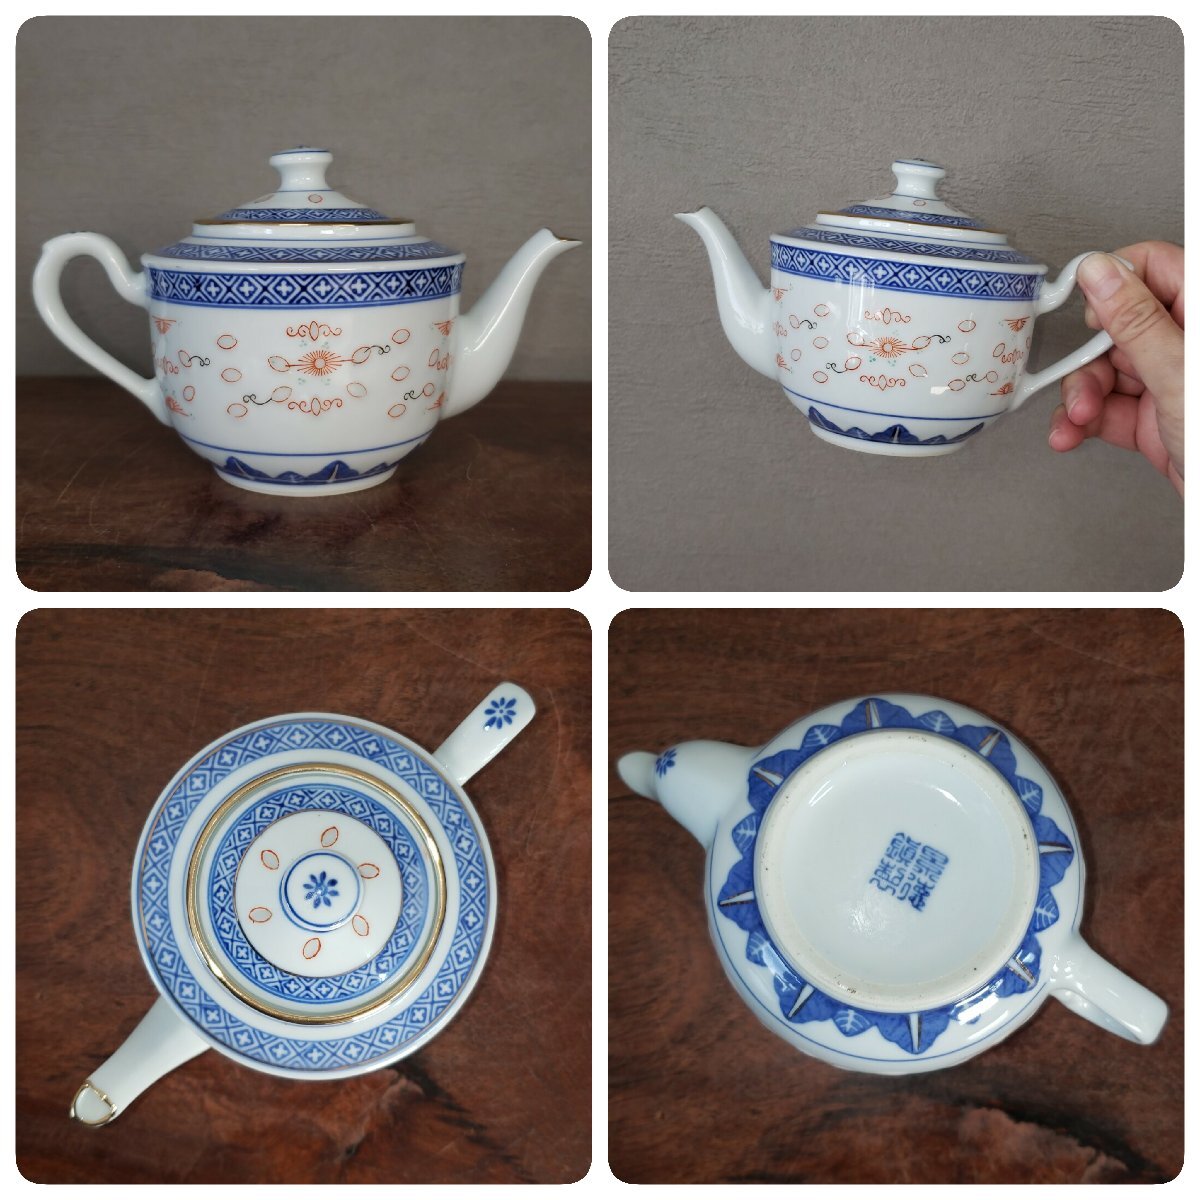 . virtue . tea utensils red . gold paint hot water . small teapot China . virtue . middle .. virtue .. virtue . made ..... roasting ho taru... hot water . old .[80s2411]